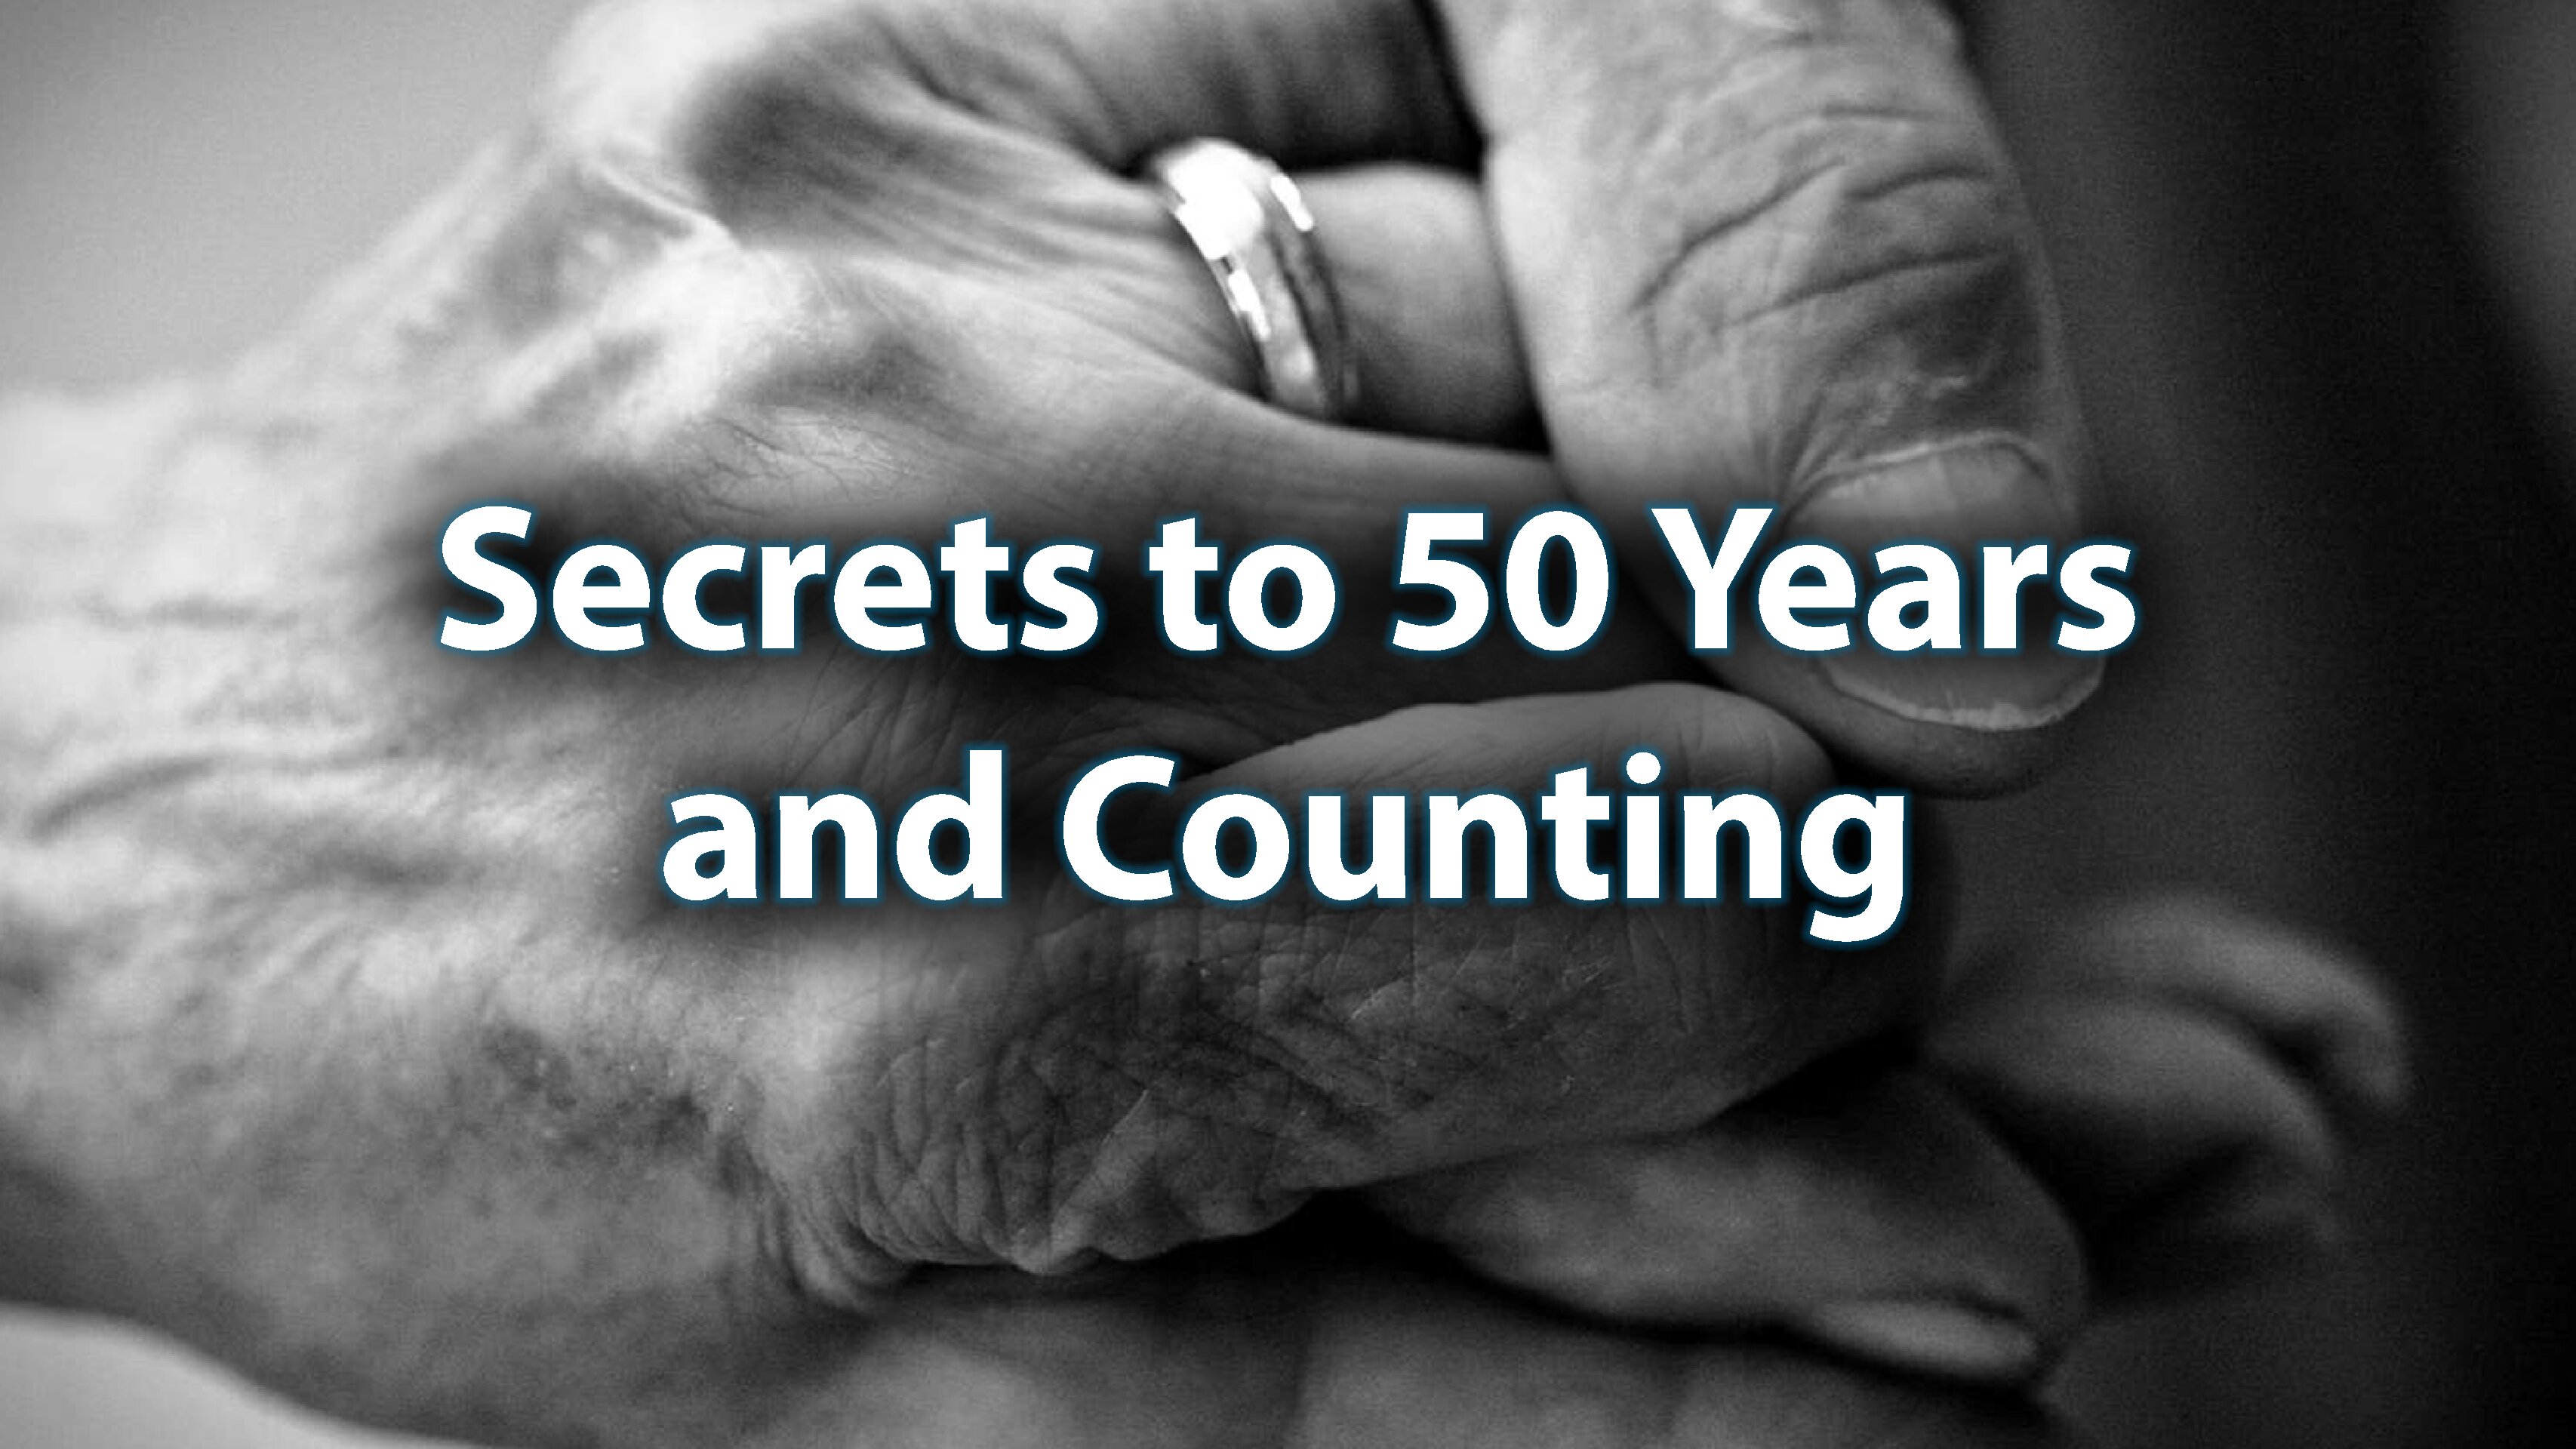 Day 20: Secrets to 50 Years & Counting